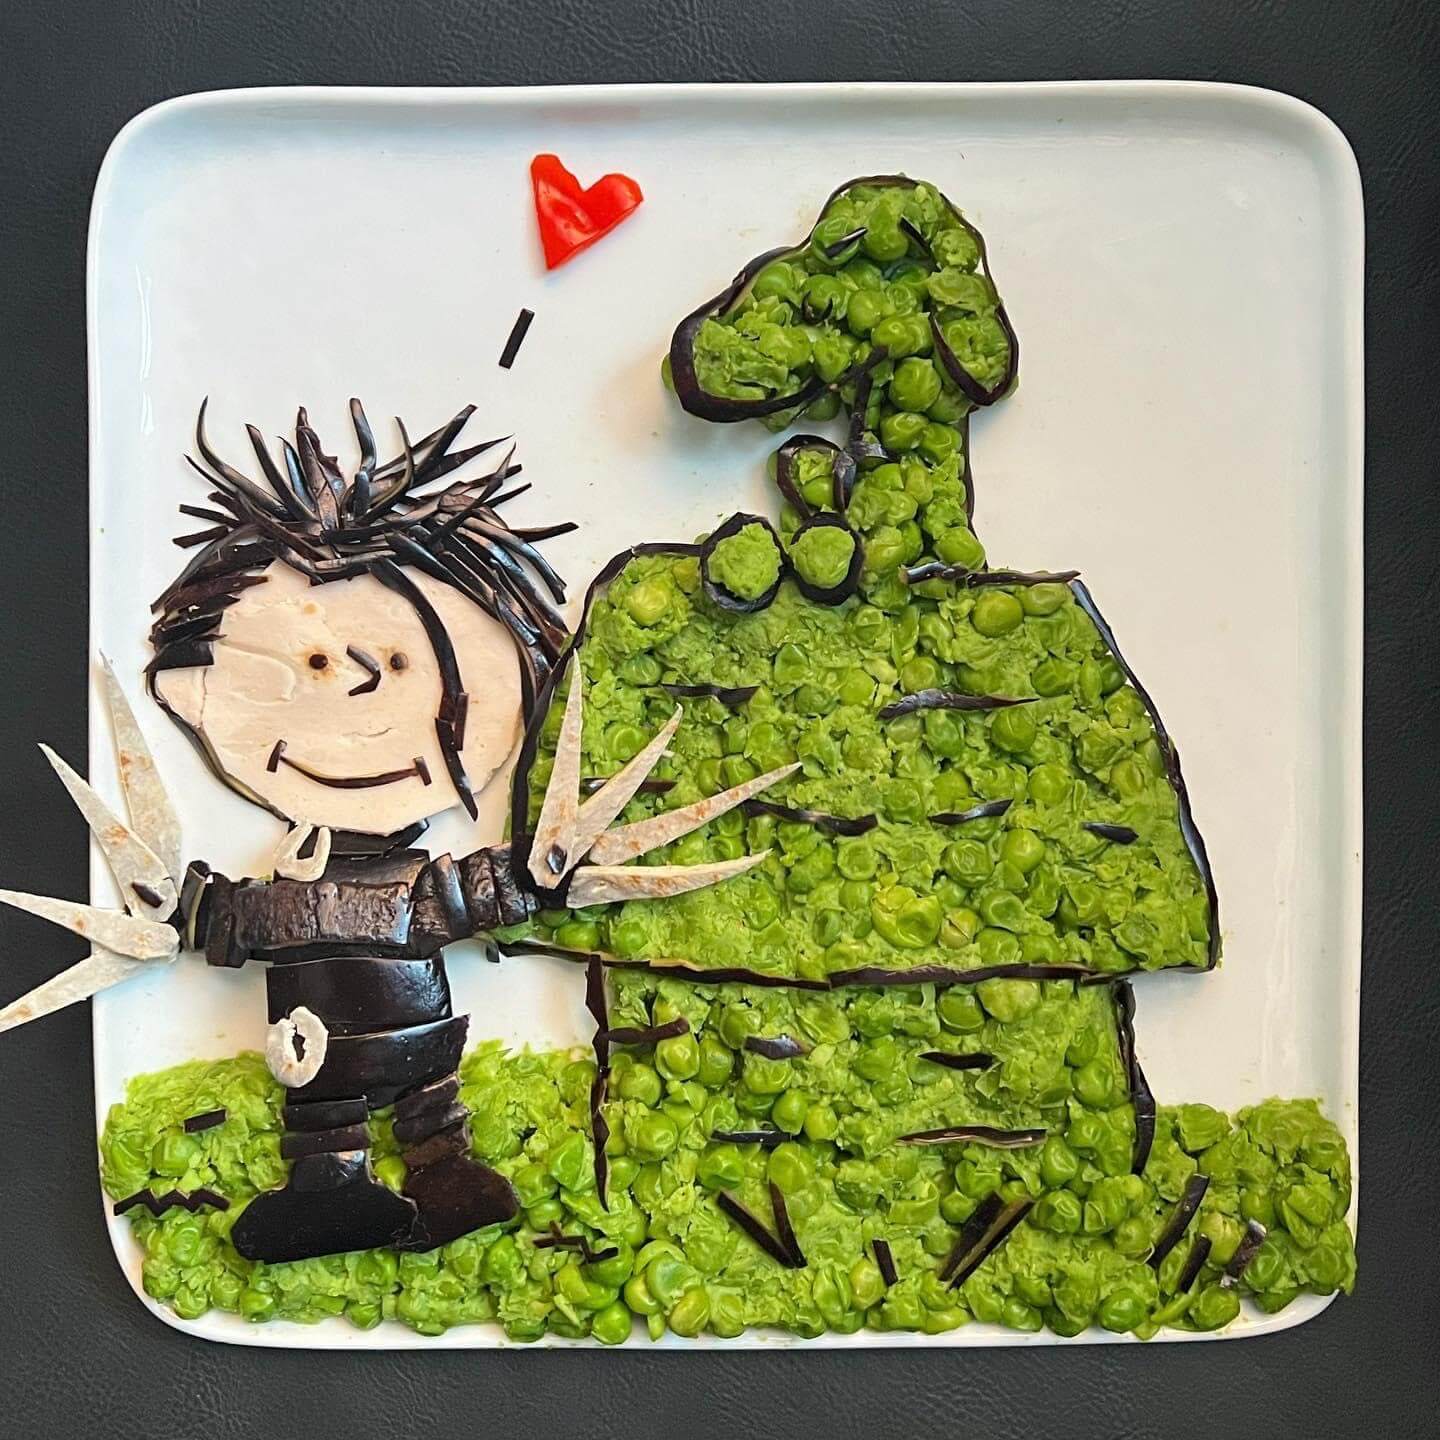 Peanuts and Edward Scissor Hands food art by Harley Langberg